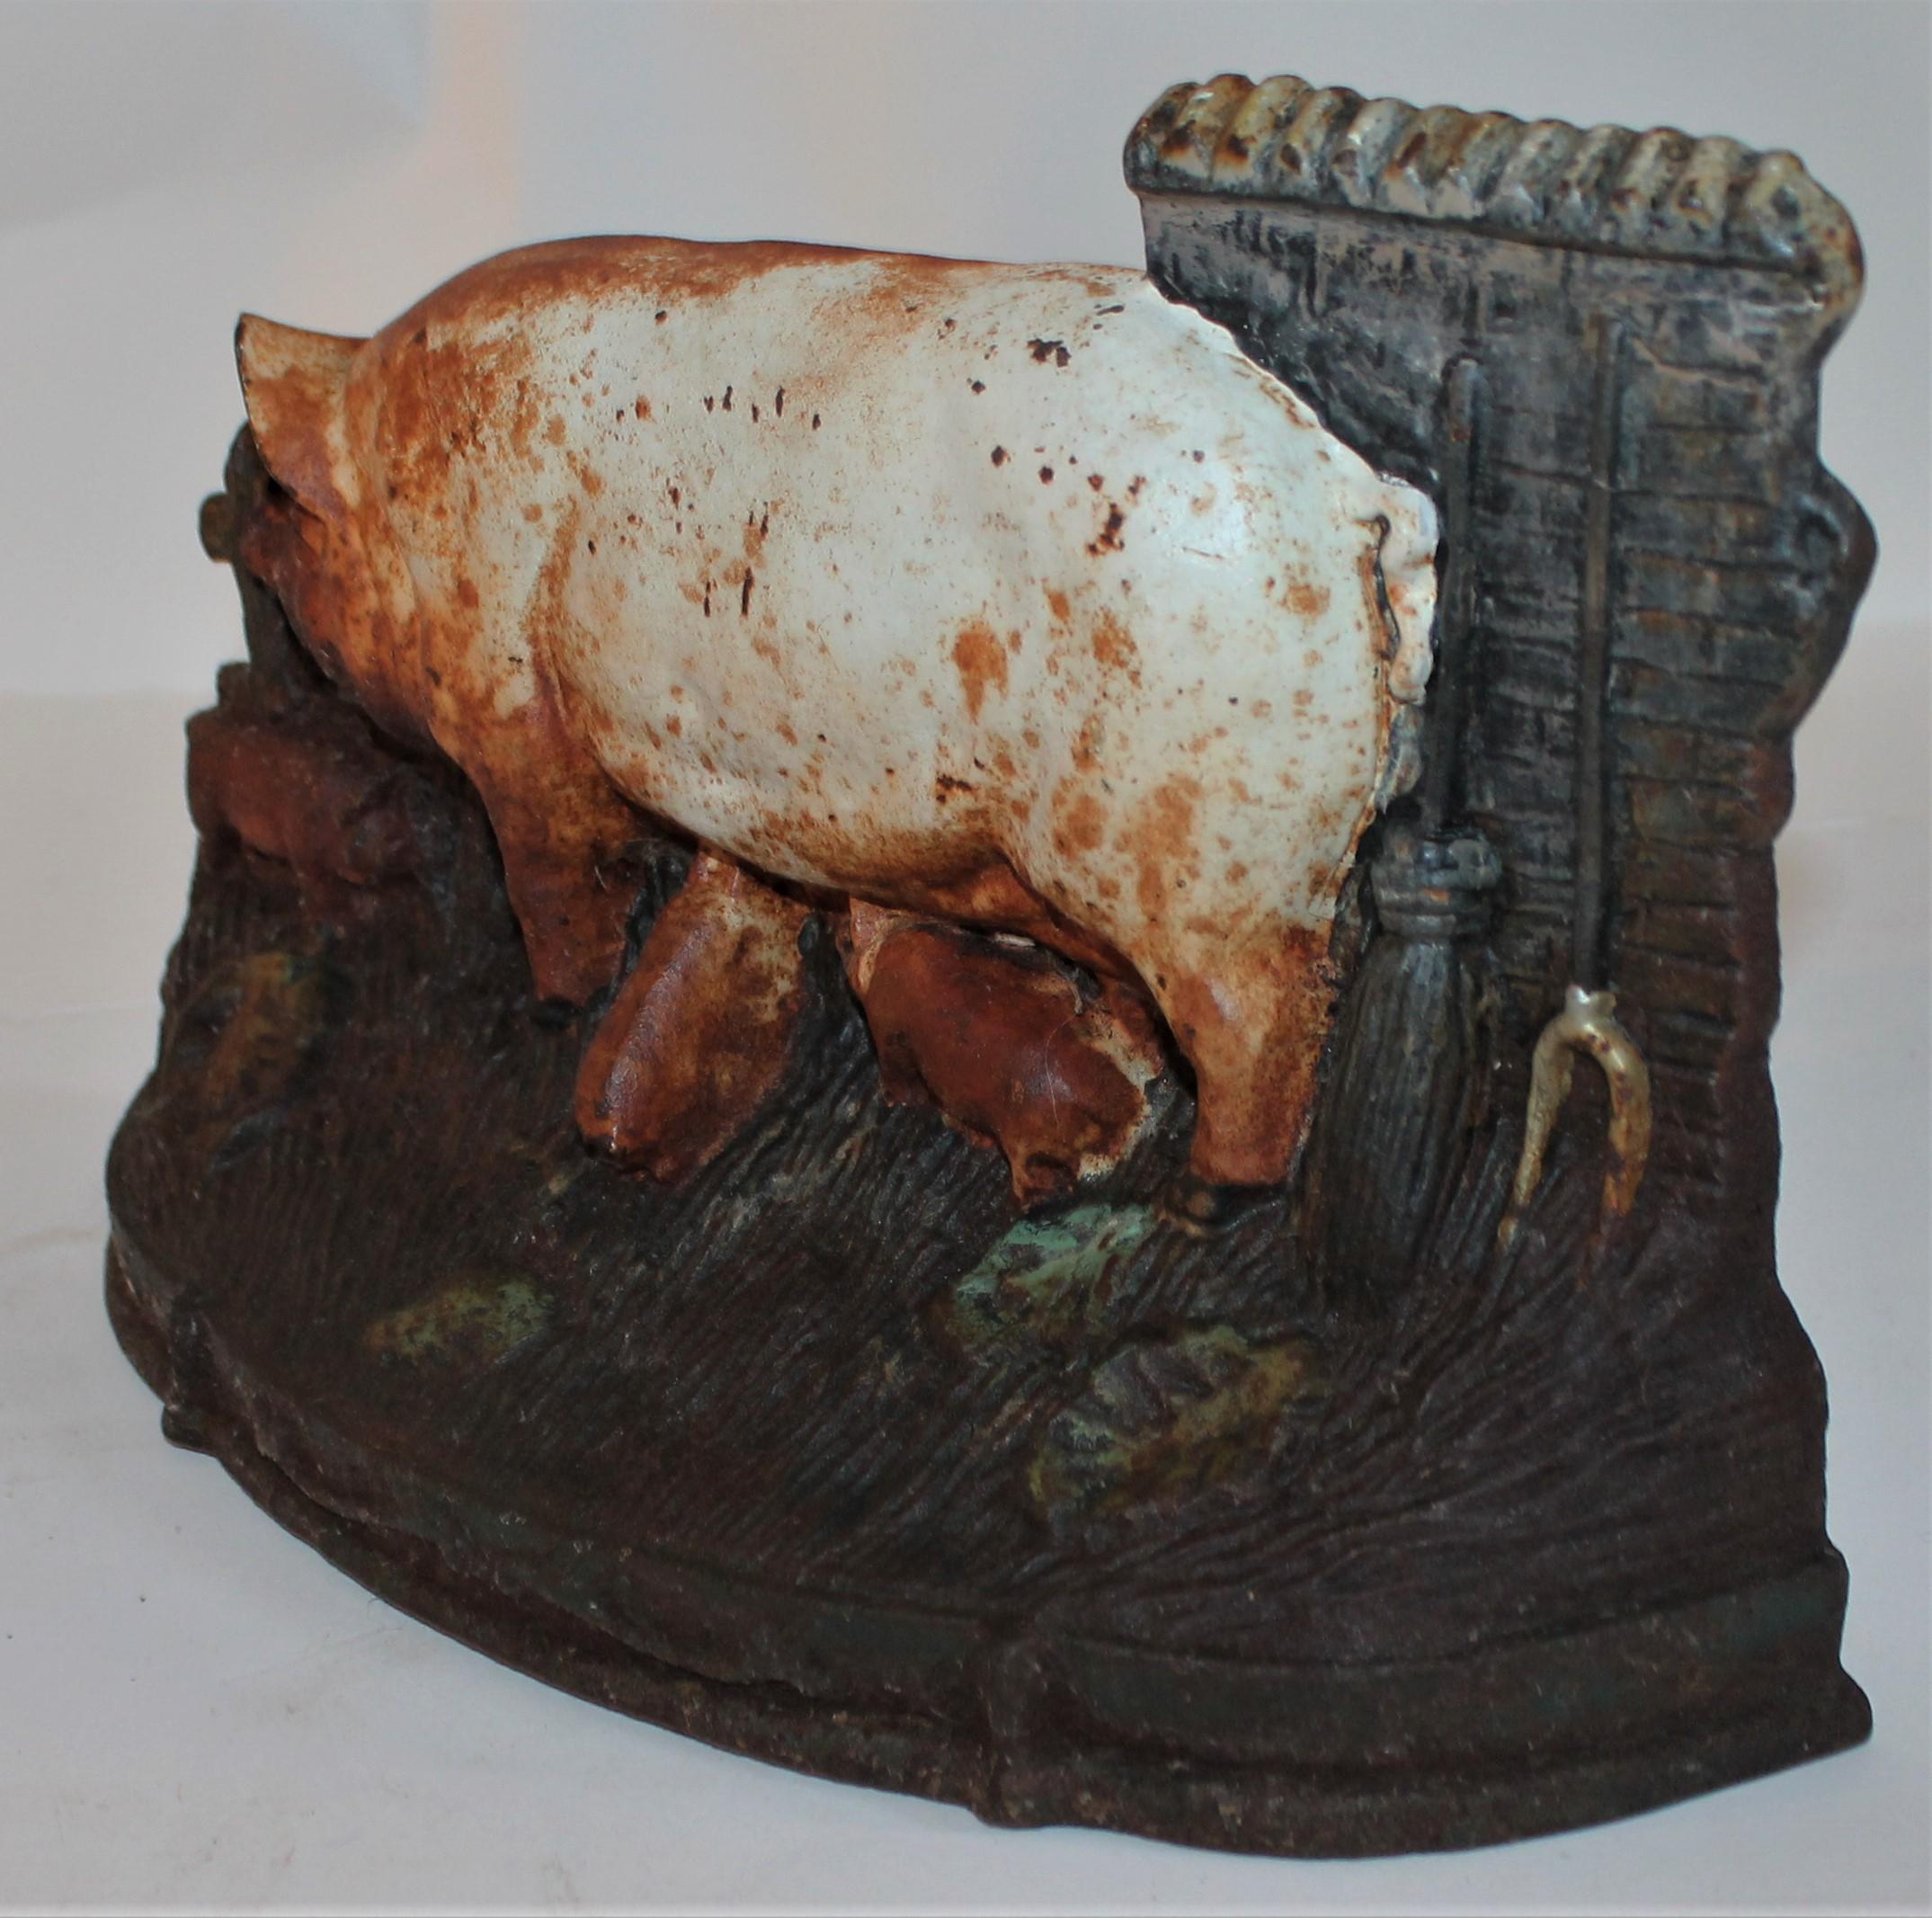 19th century original painted momma pig and baby pigs cast iron doorstop. Possibly a Hubley. Its unsigned.